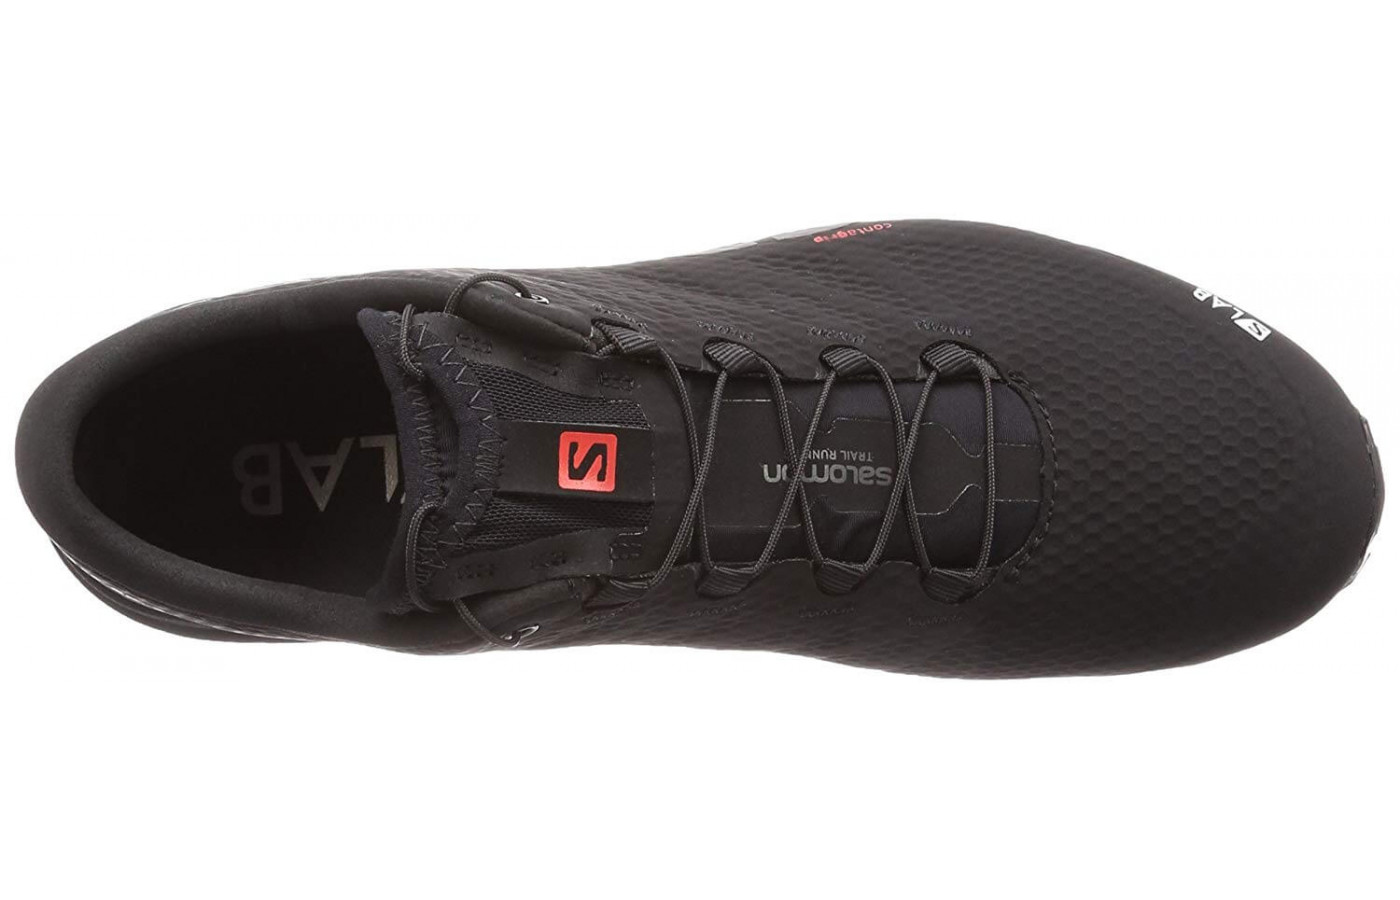 Anti-debris mesh provides a protective wear while still keeping the S-Lab Speed 2 breathable.